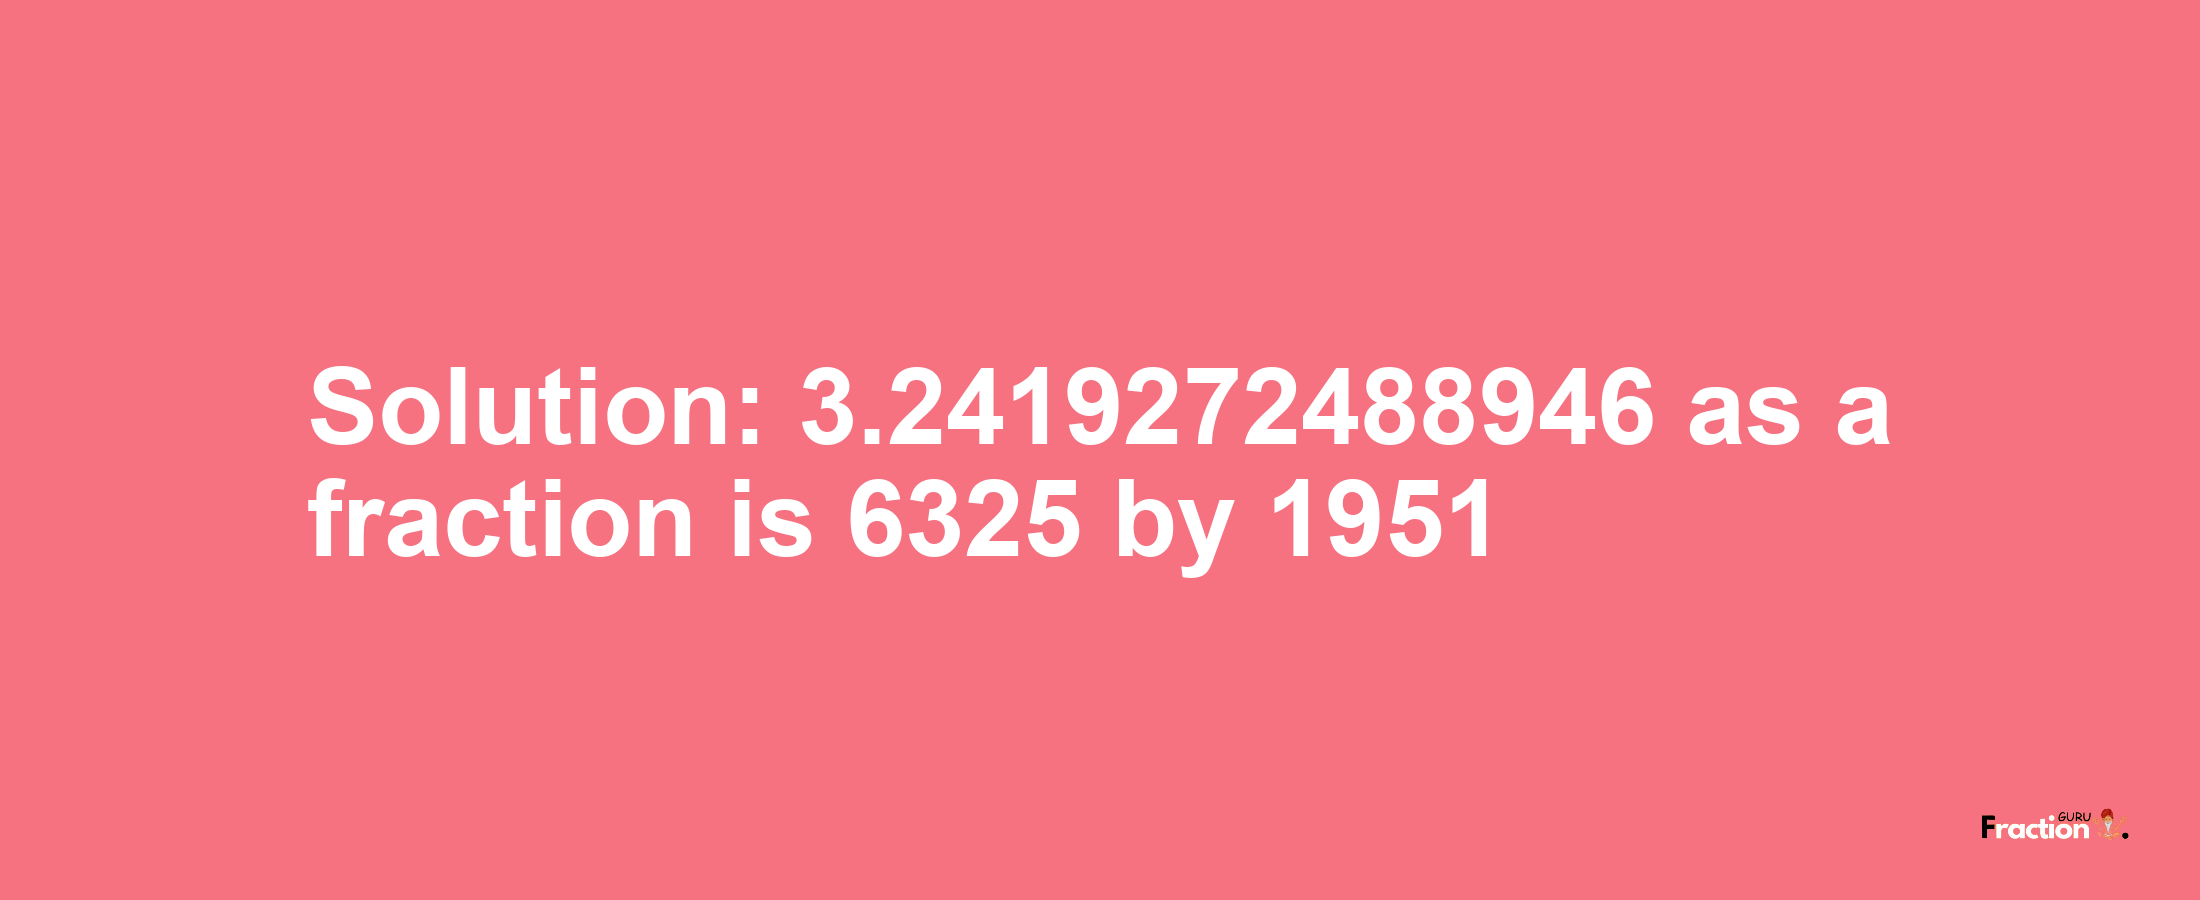 Solution:3.2419272488946 as a fraction is 6325/1951